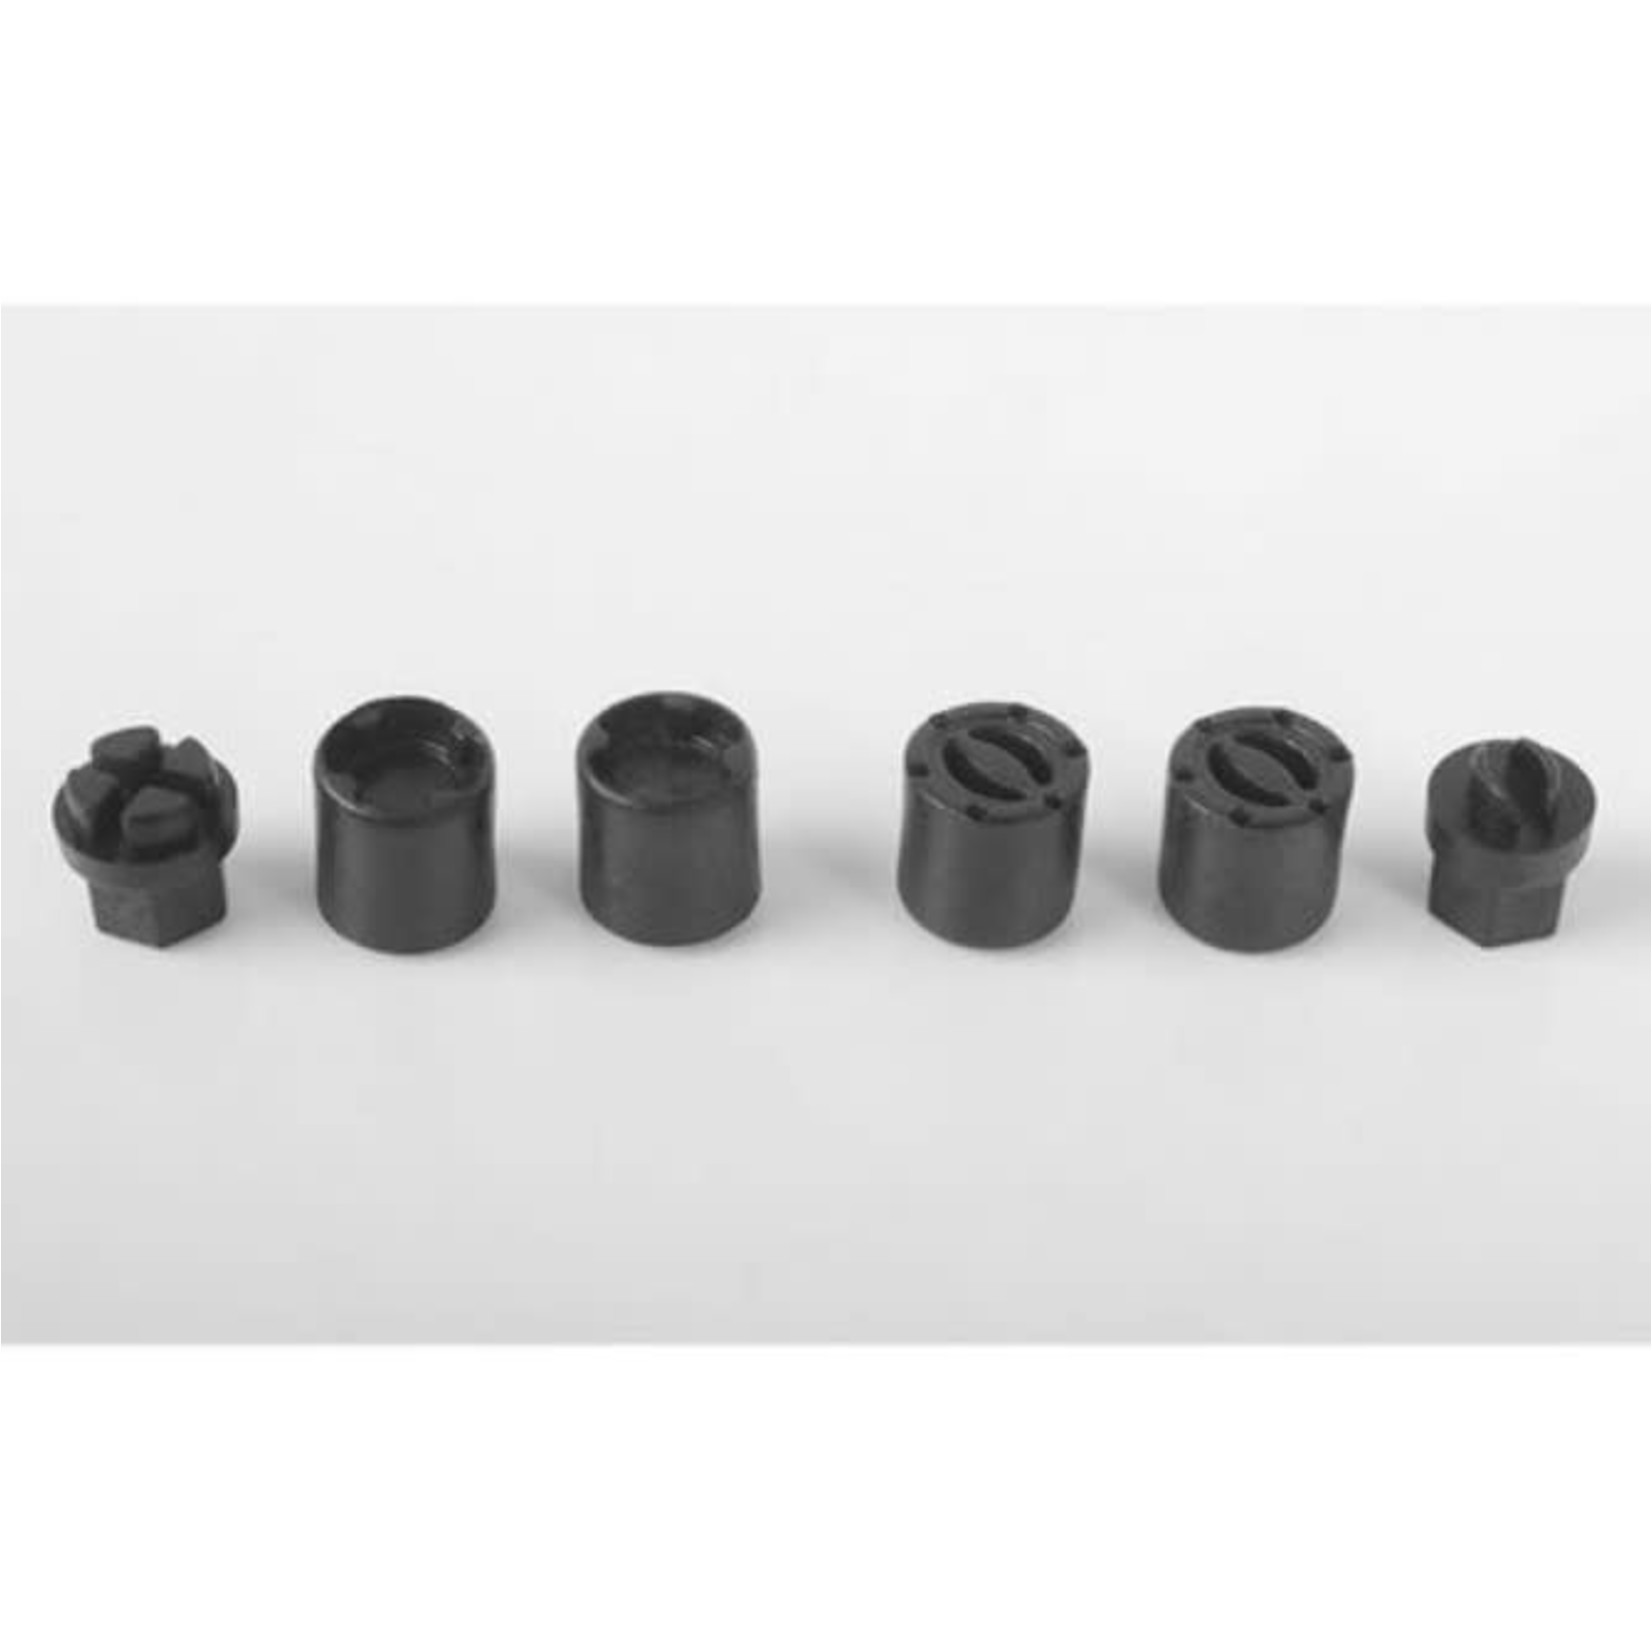 RC4WD 1/18 Scale Warn Front and Rear Hubs